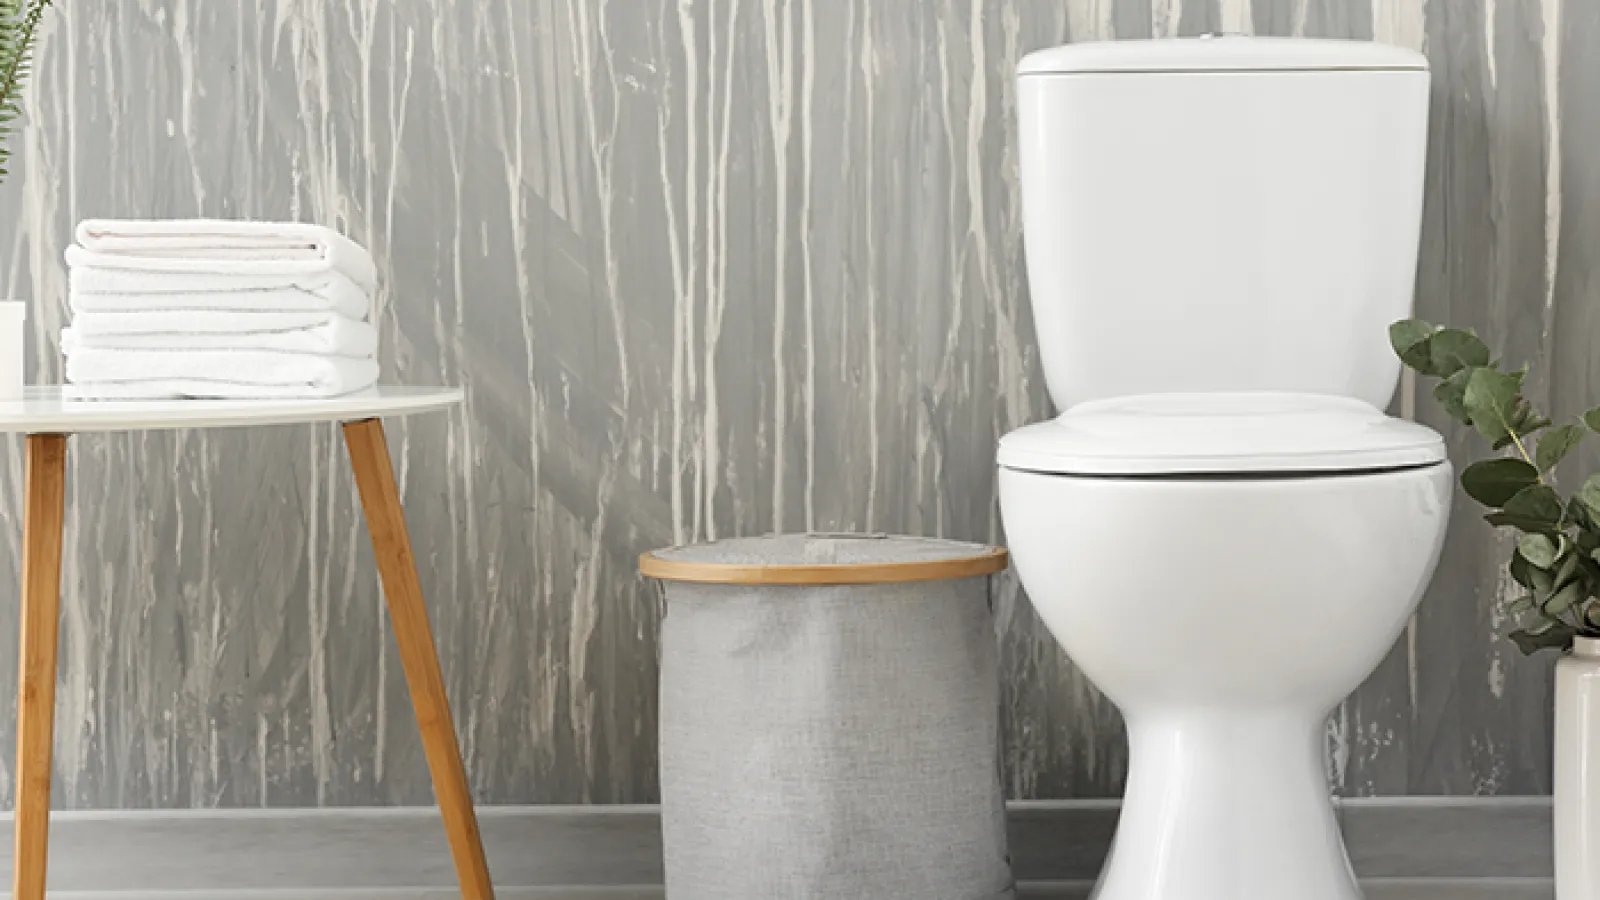 How to Choose a Toilet for Your Home